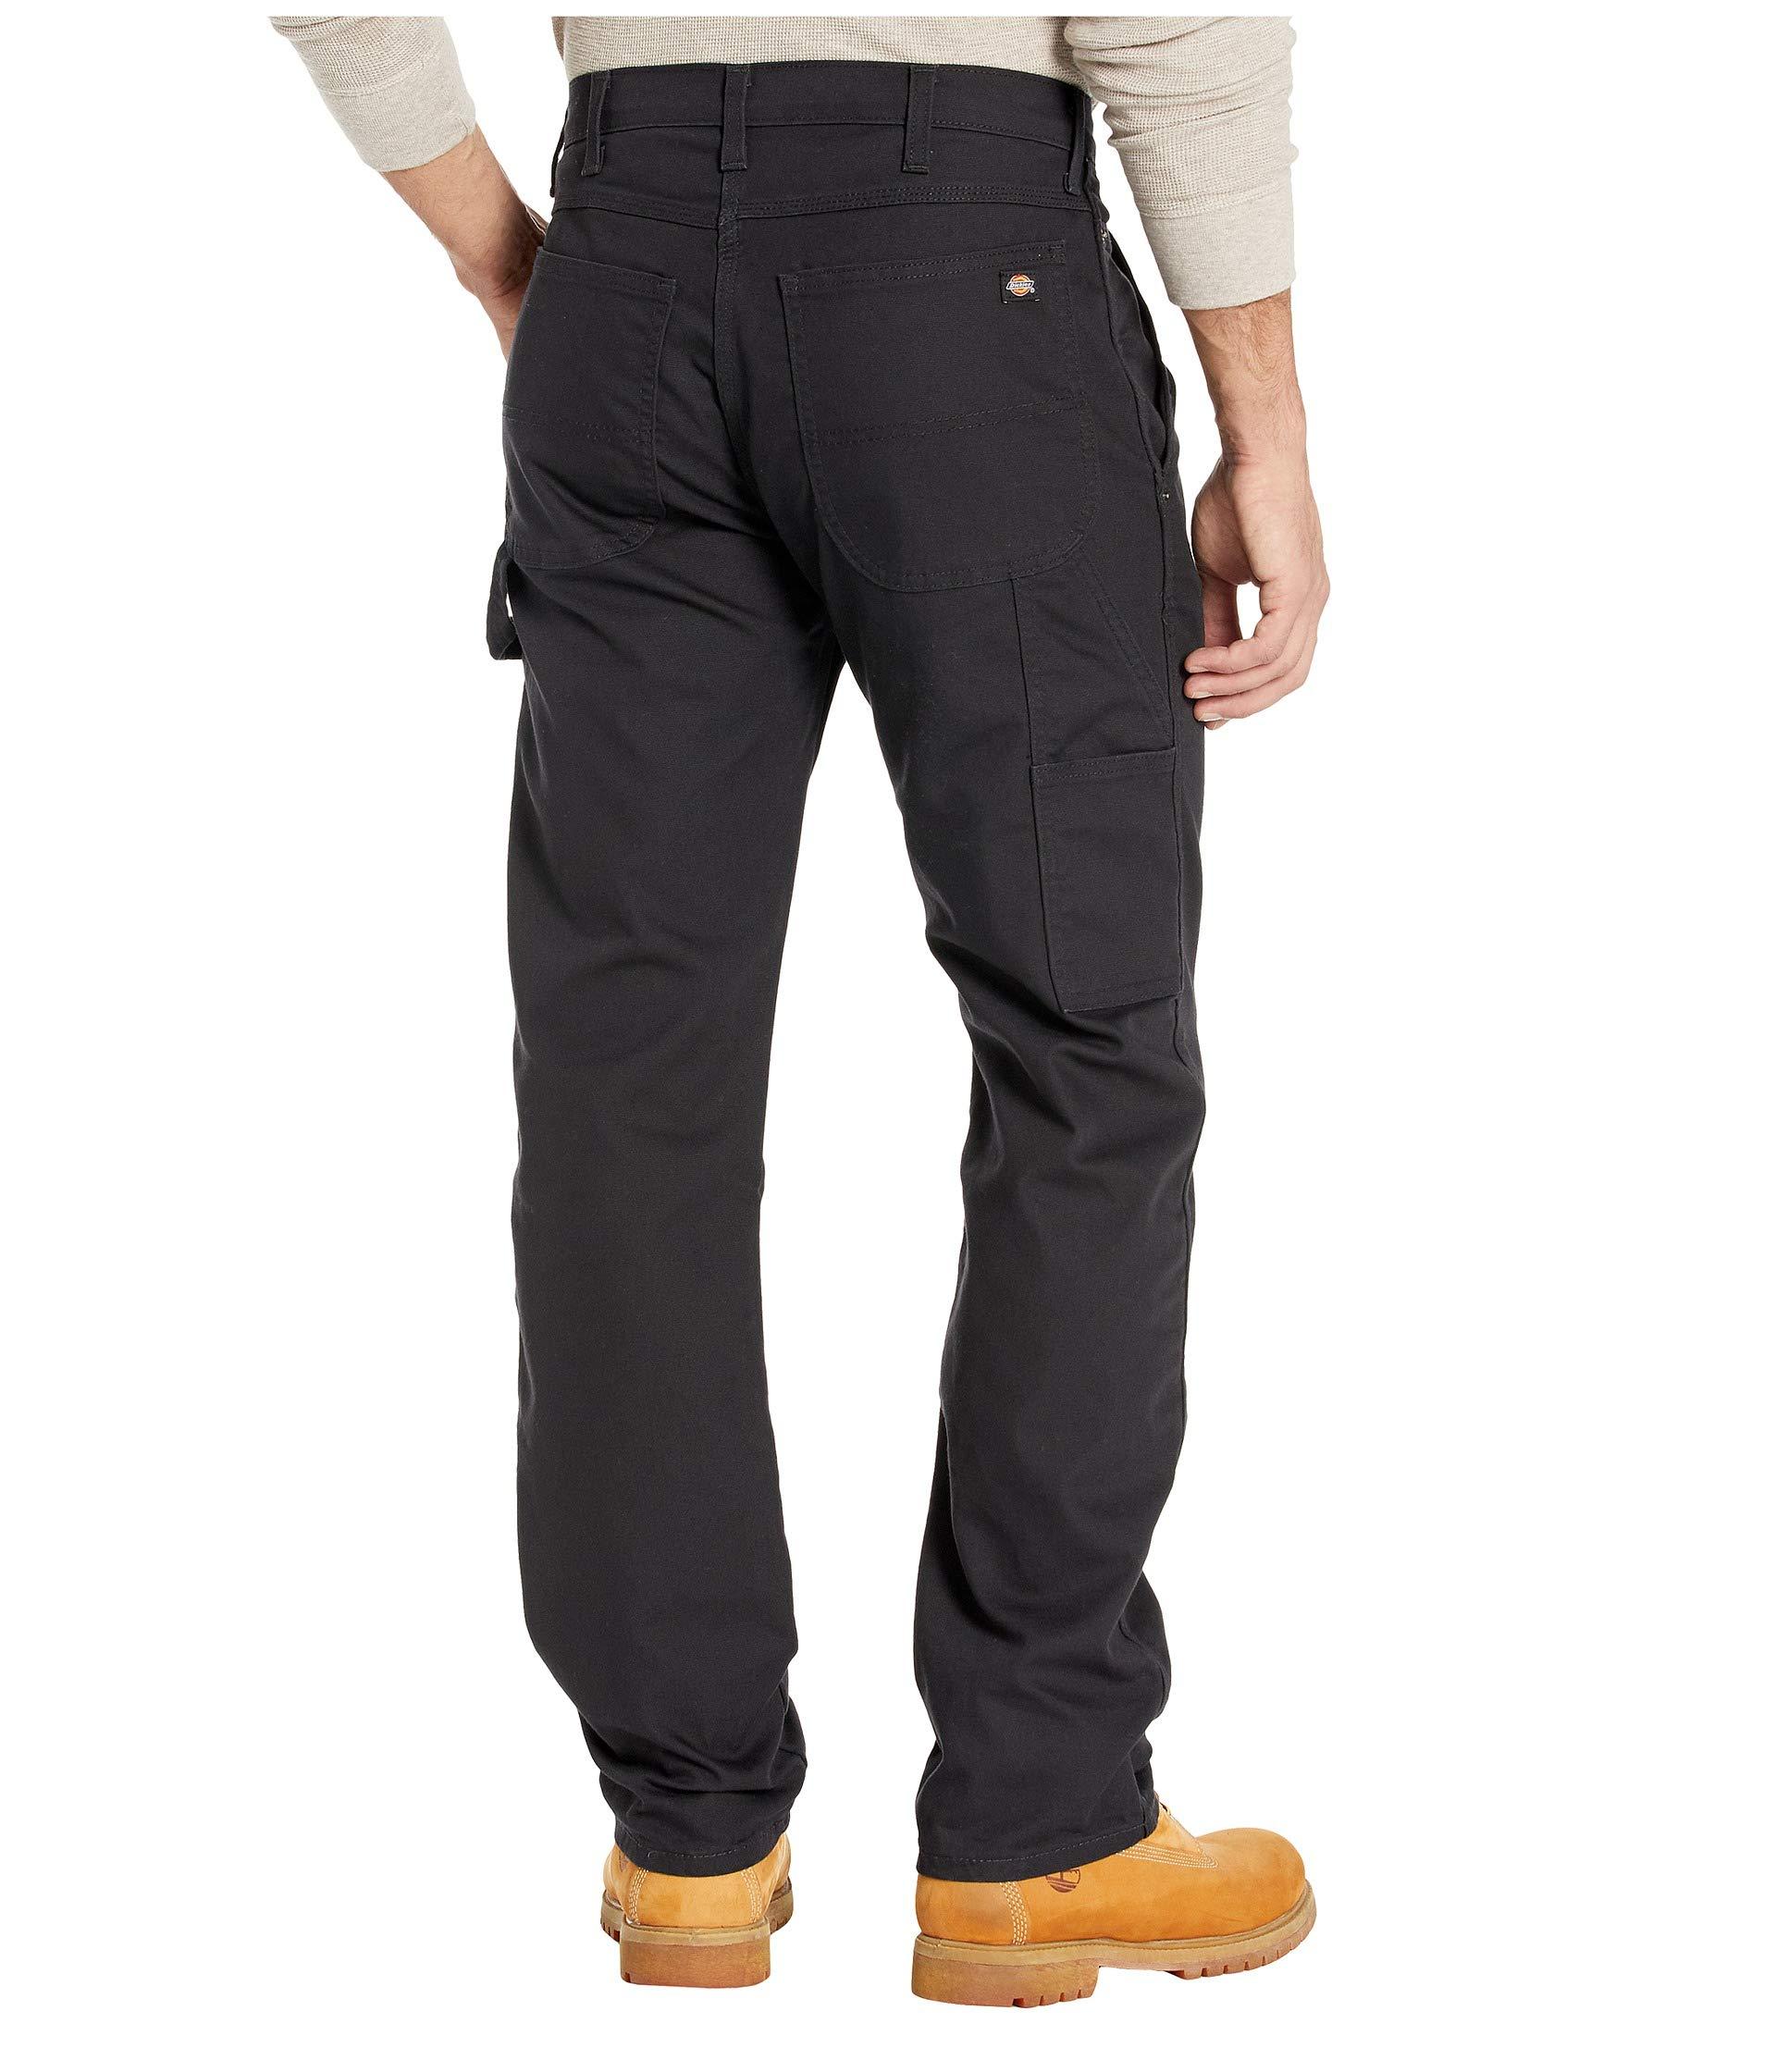 Dickies Cotton Stretch Duck Carpenter Pants in Black for Men - Lyst